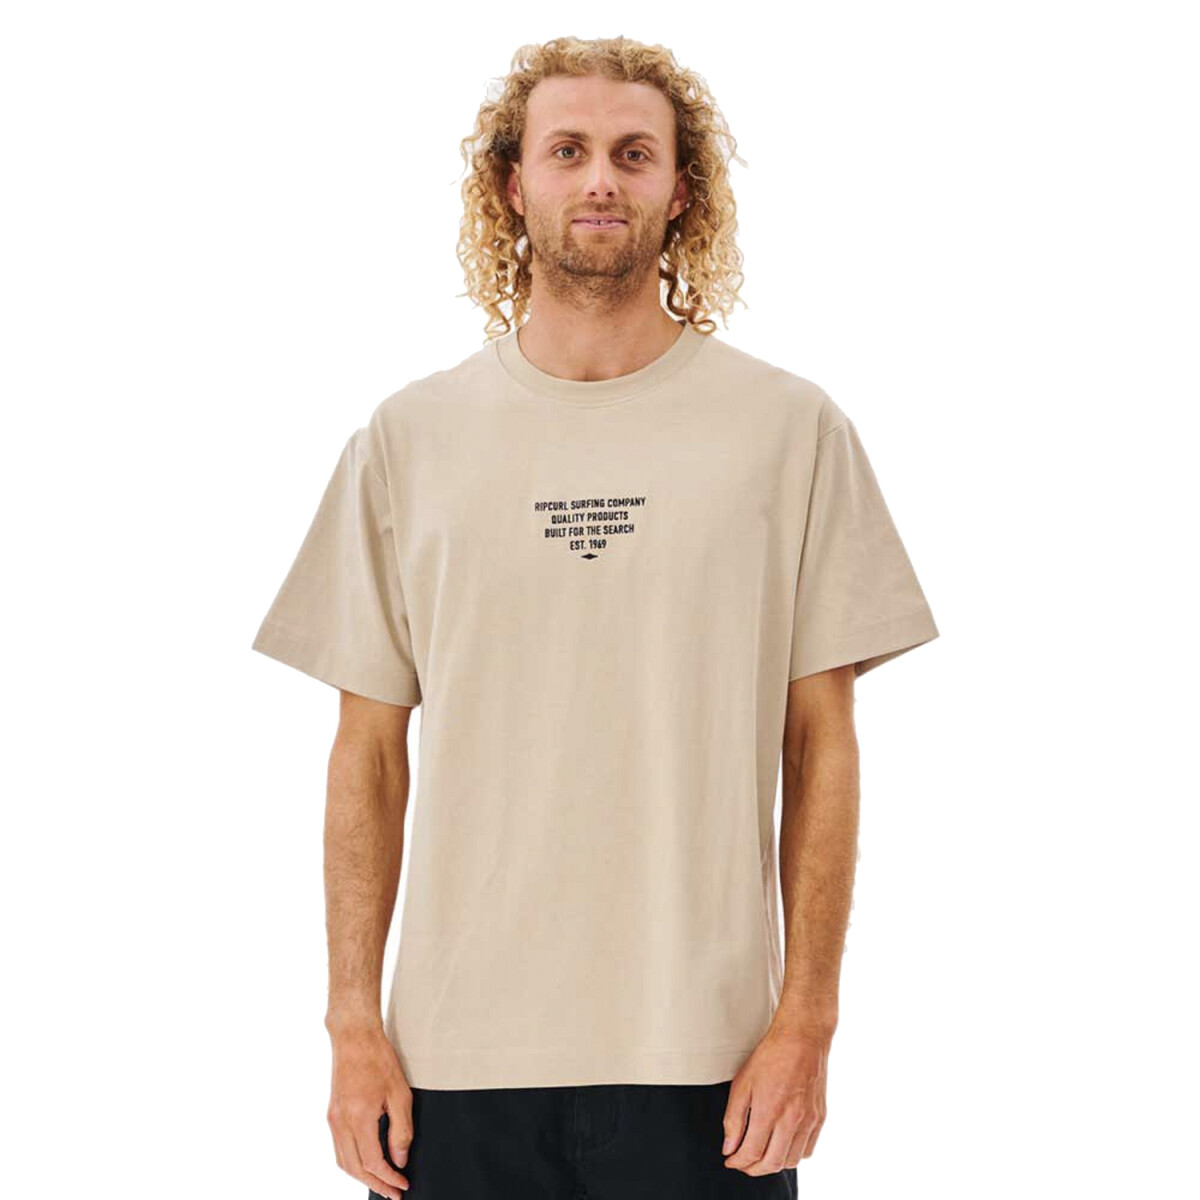 Remera Rip Curl Quality Surf Products S/S 